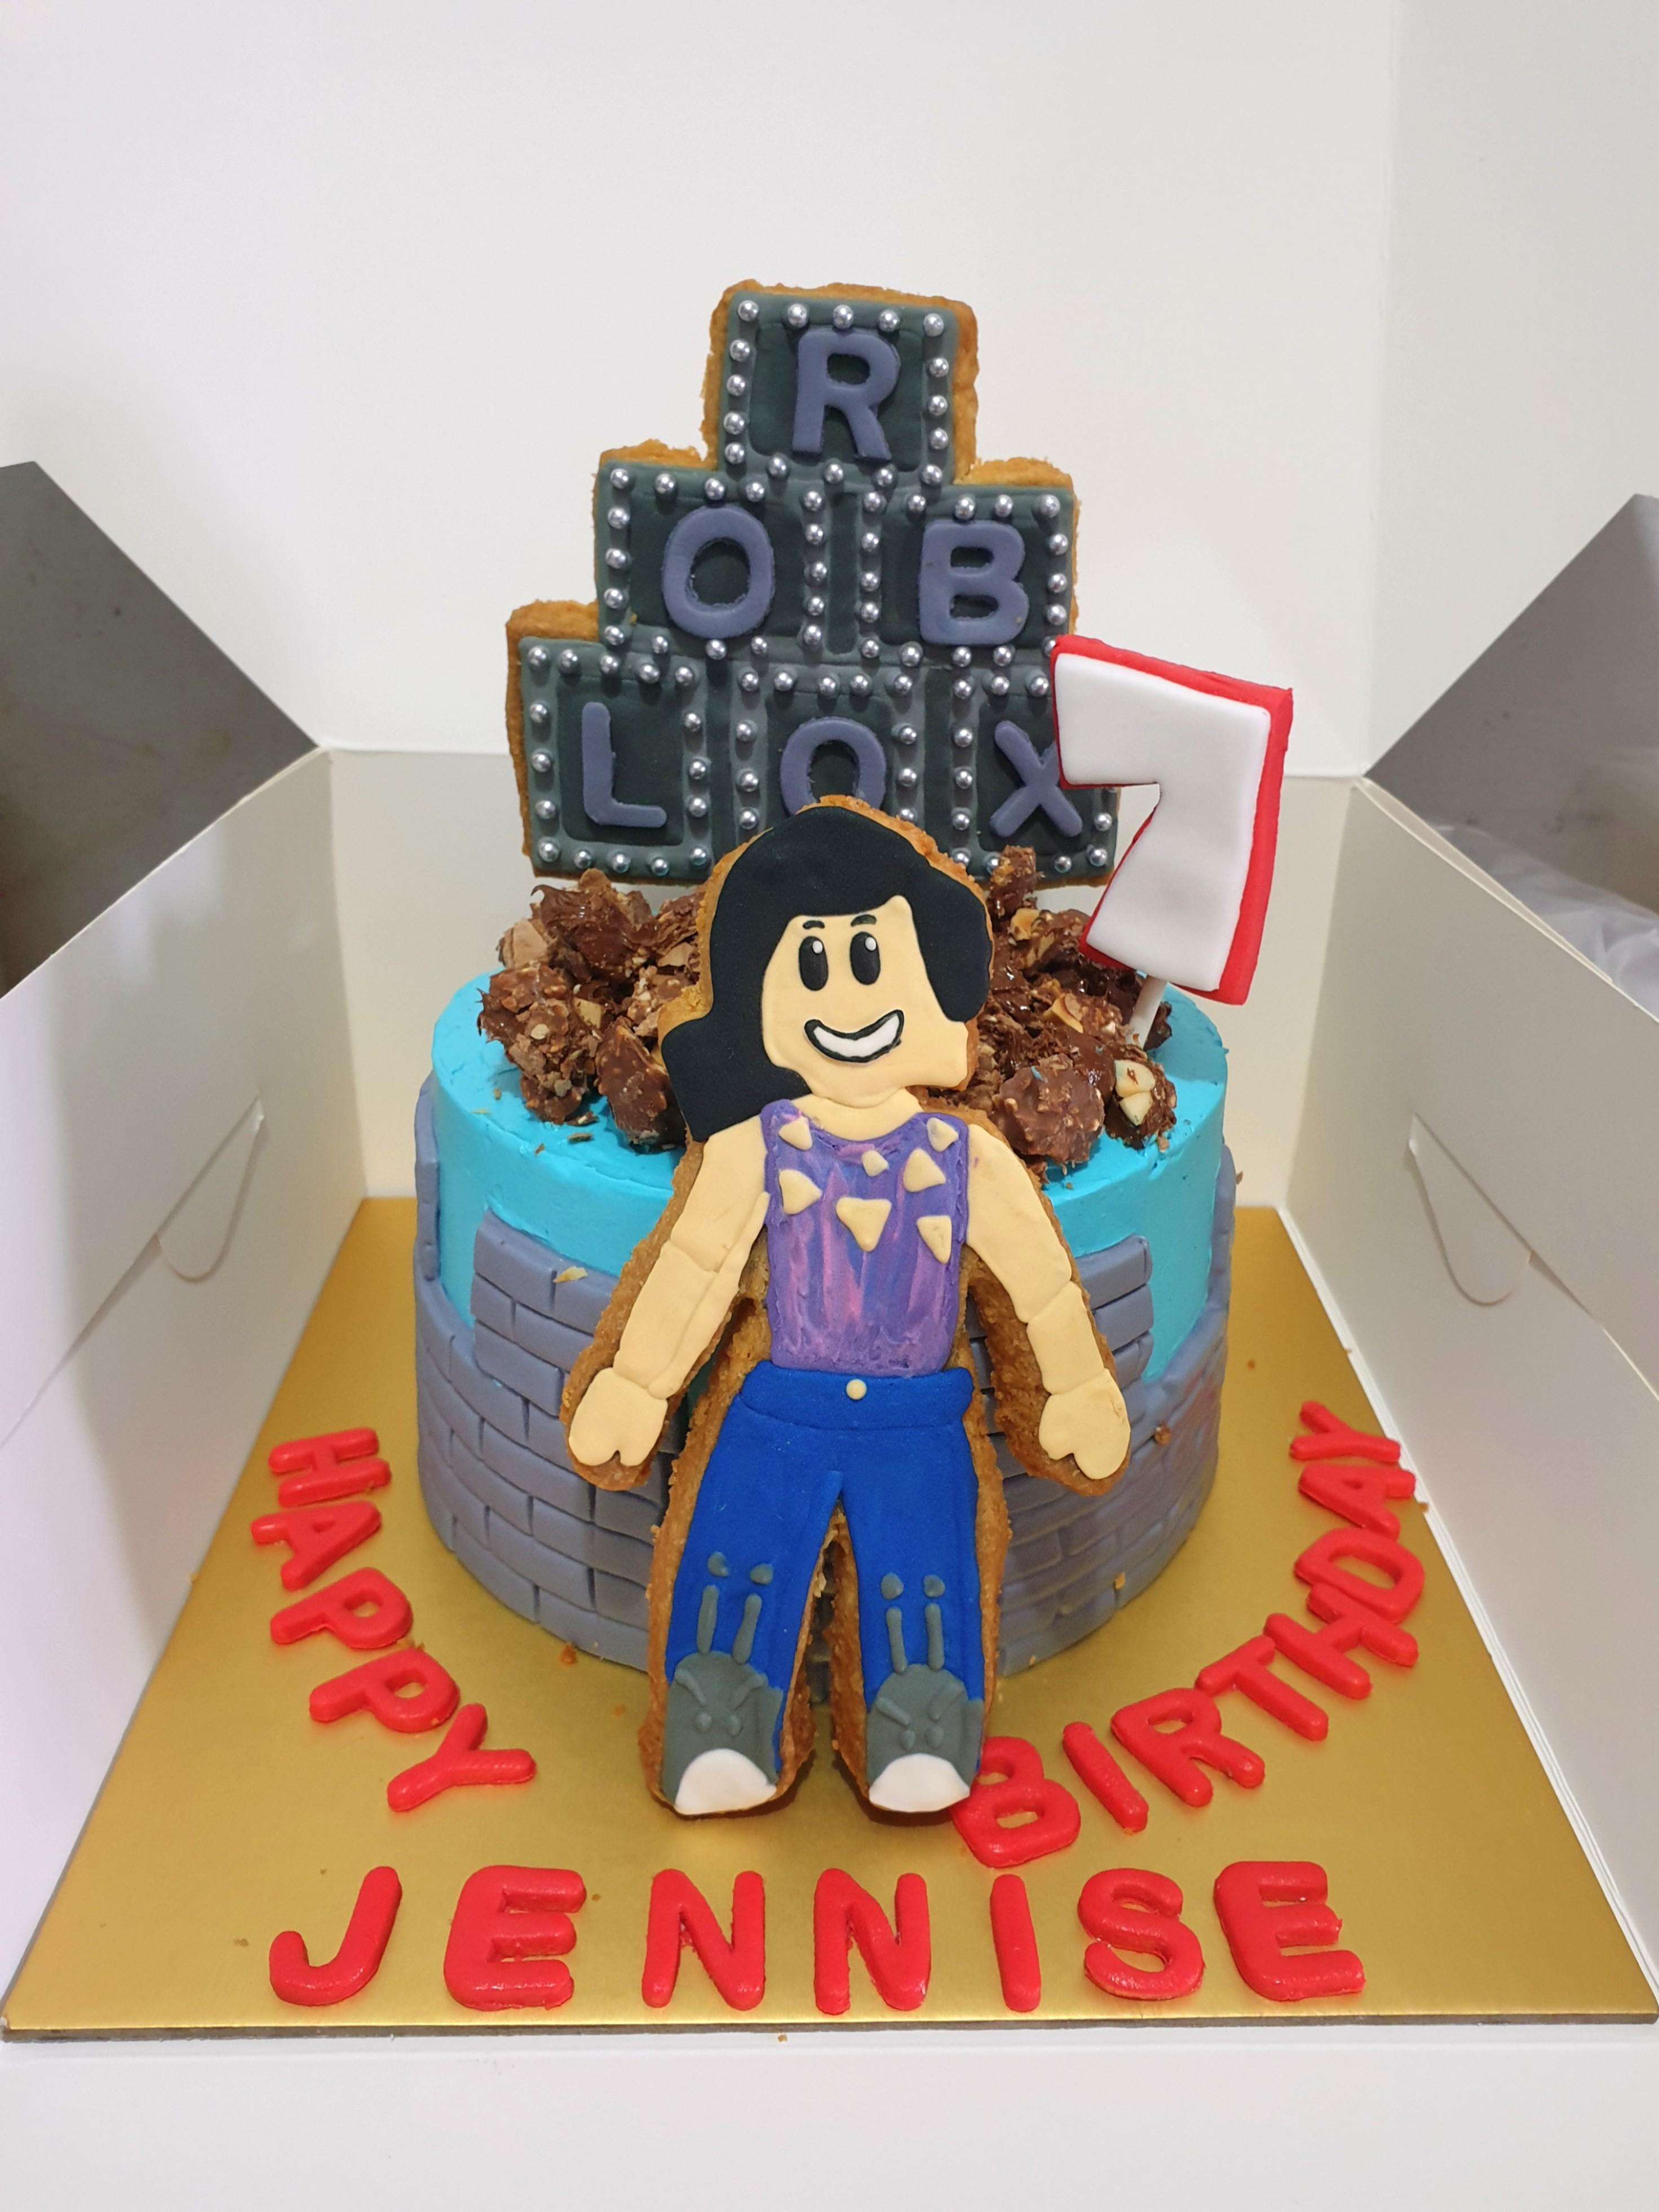 Roblox Avatar Cake With Cookies Topper Food Drinks Baked Goods On Carousell - s monogram roblox